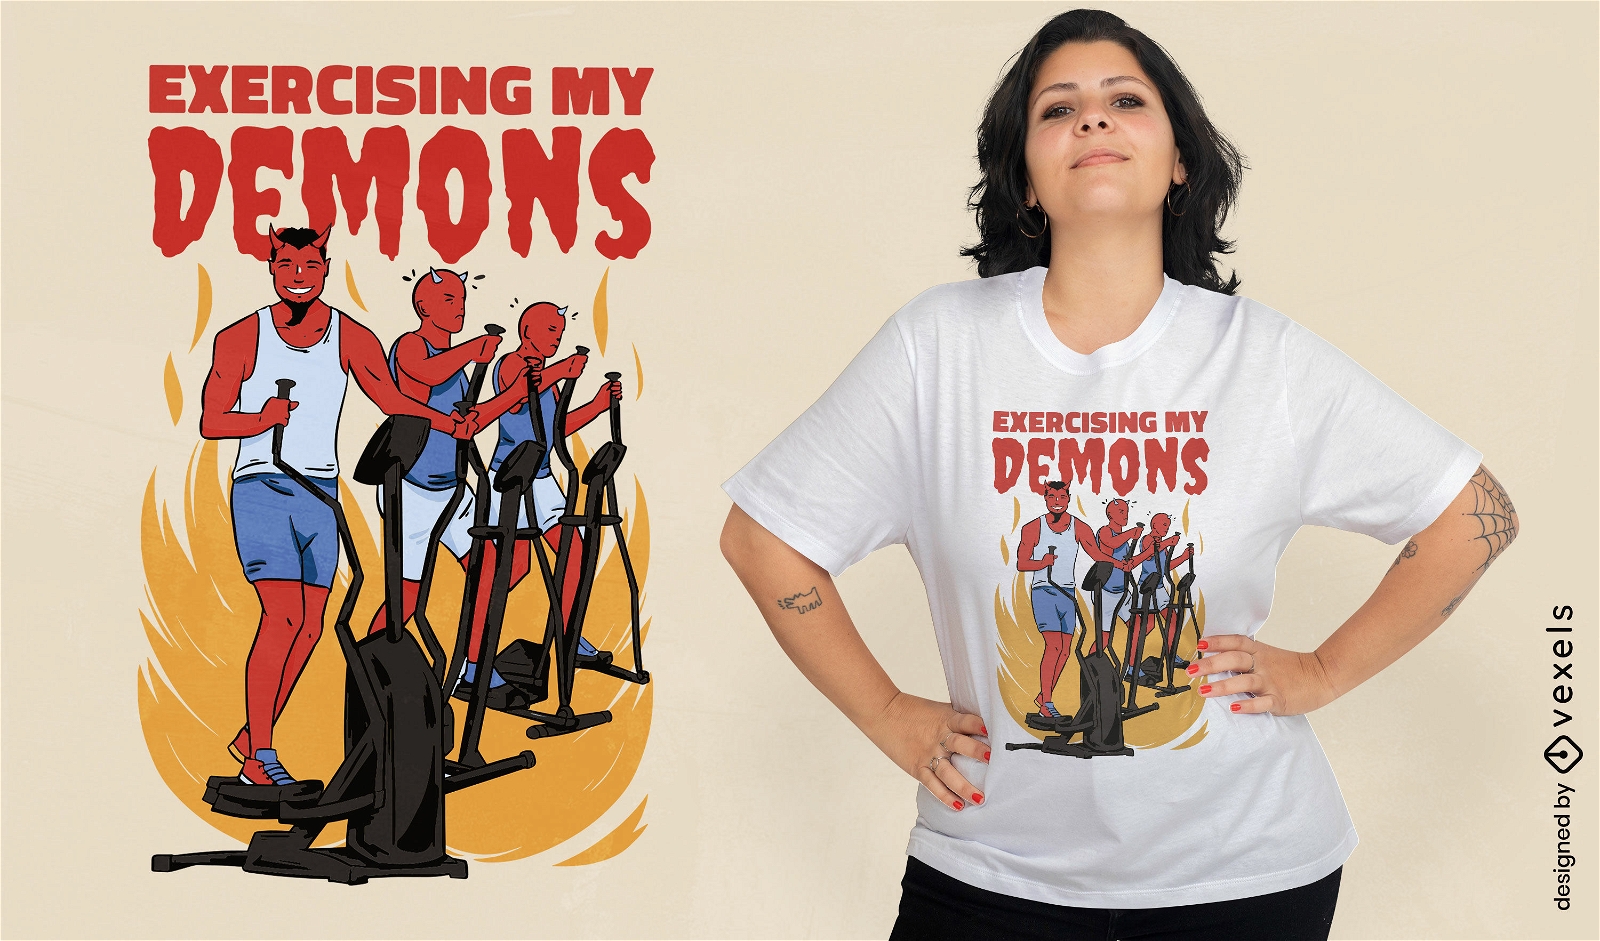 Funny demons in the gym t-shirt design